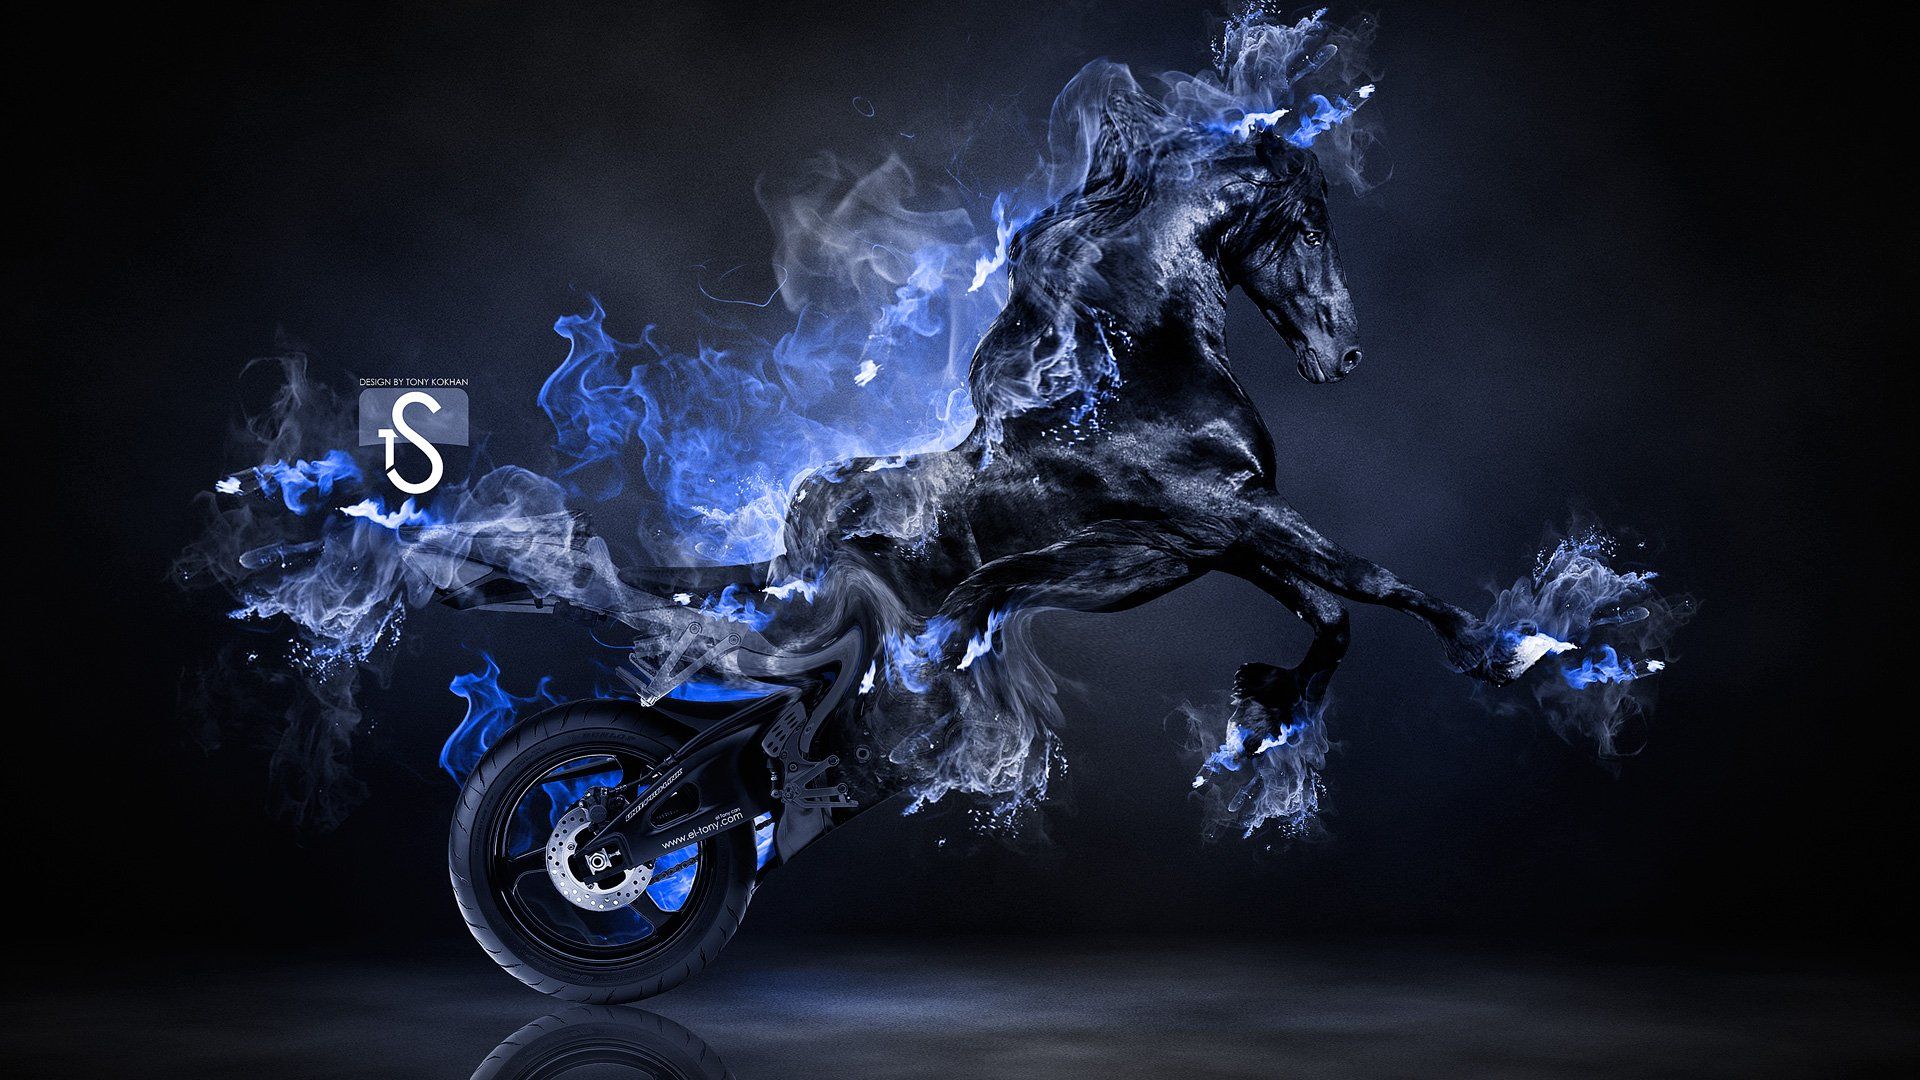 awesome blue fire horse